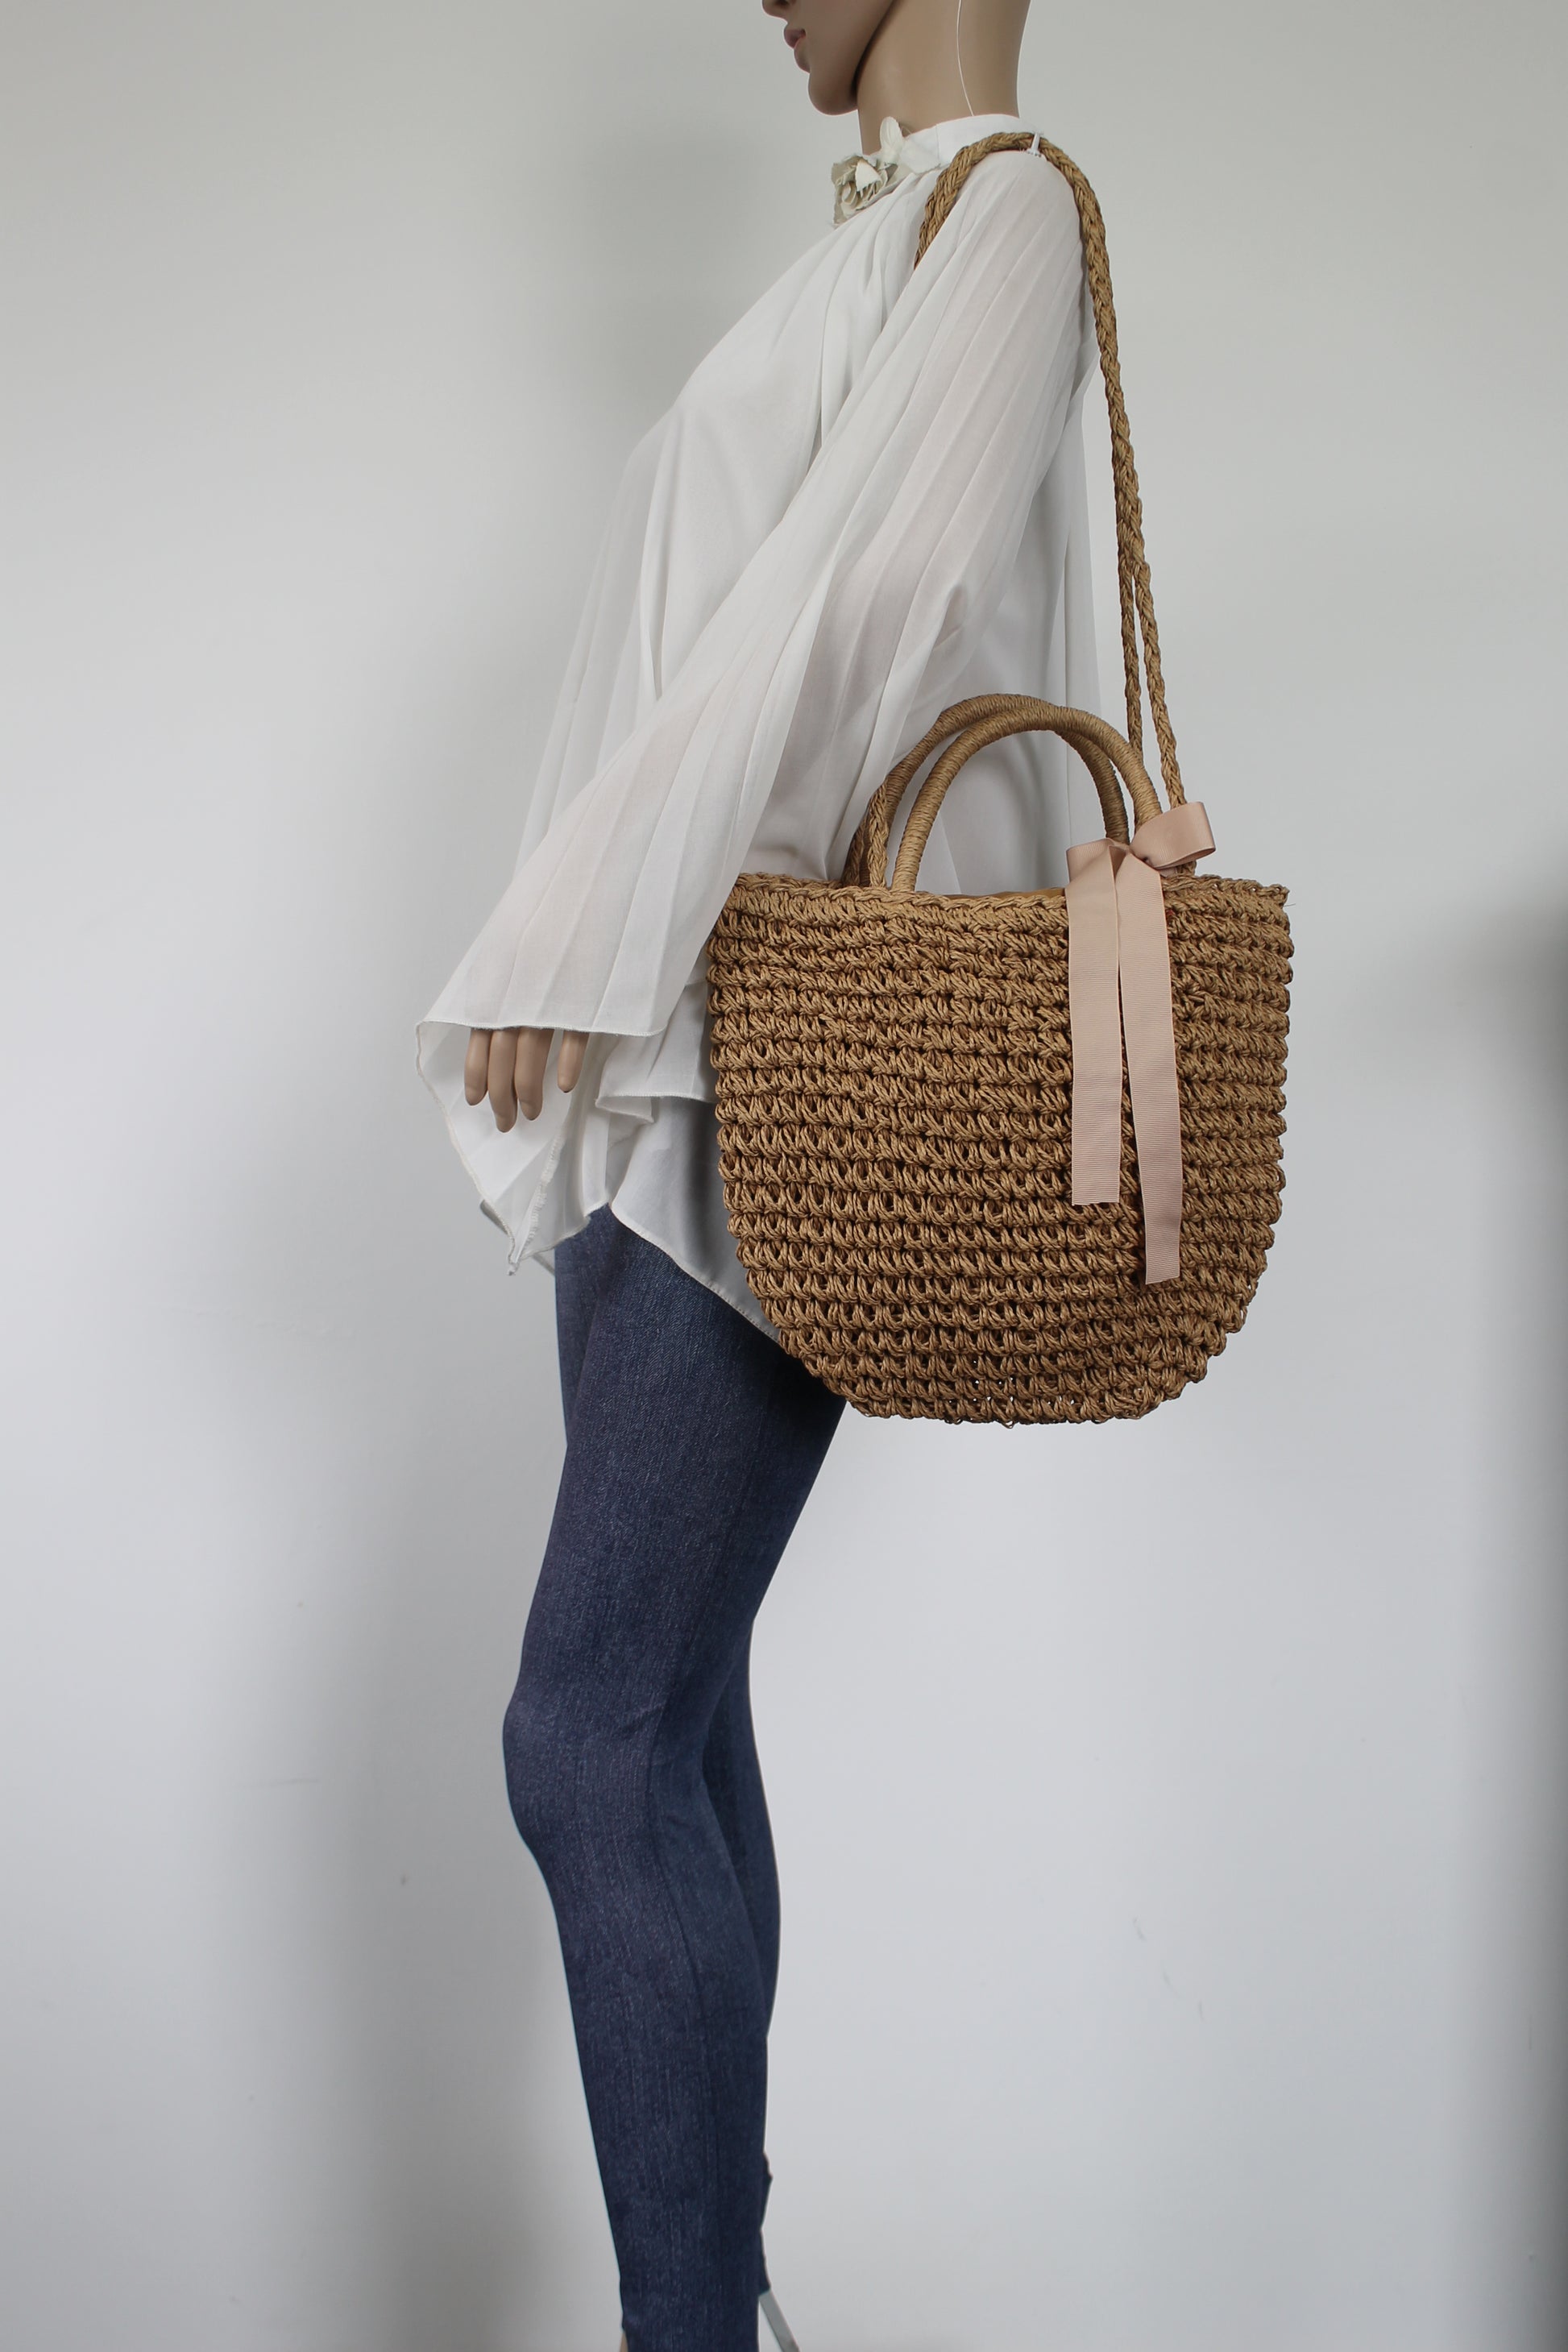 Swanky Swans Straw Soft Basket Style Beach Tote Bag Summer HandbagPerfect for School, Weddings, Day out!